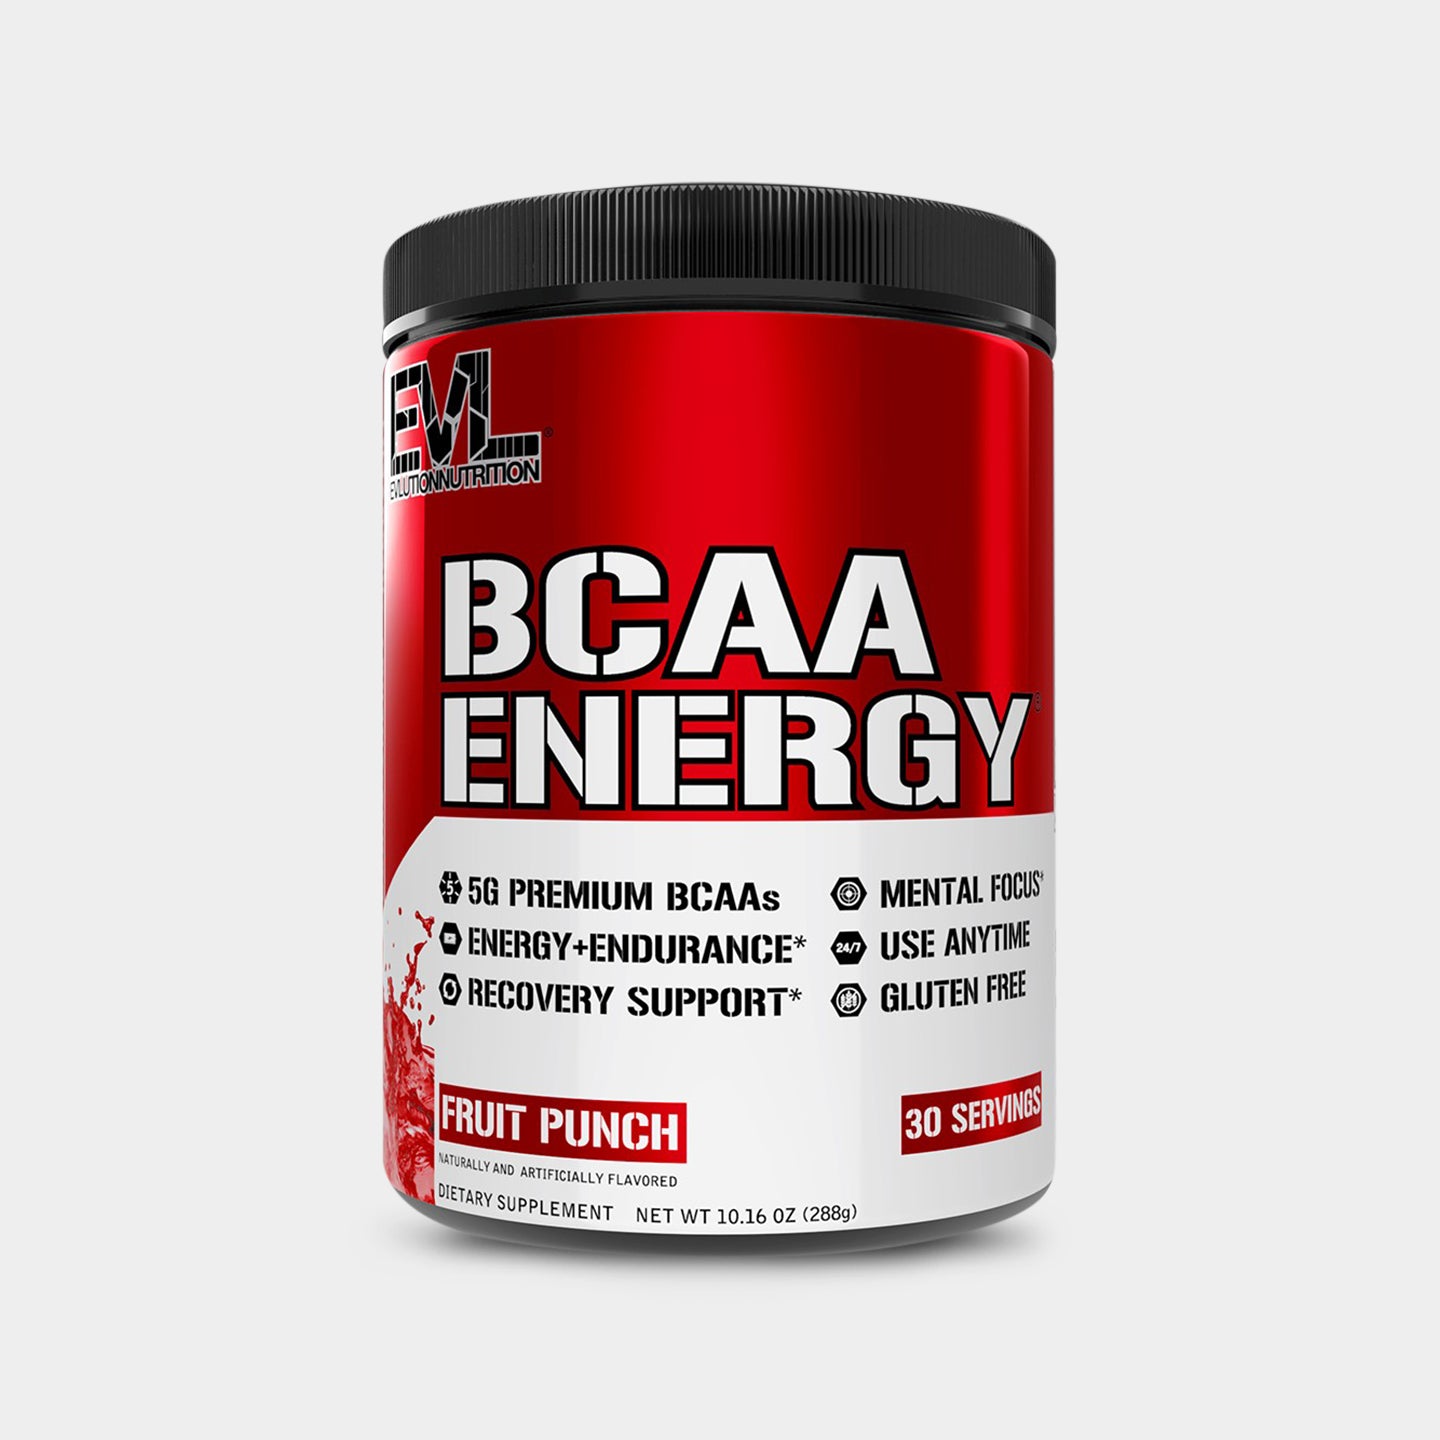 EVLUTION NUTRITION BCAA Energy Amino Acids, Fruit Punch, 30 Servings